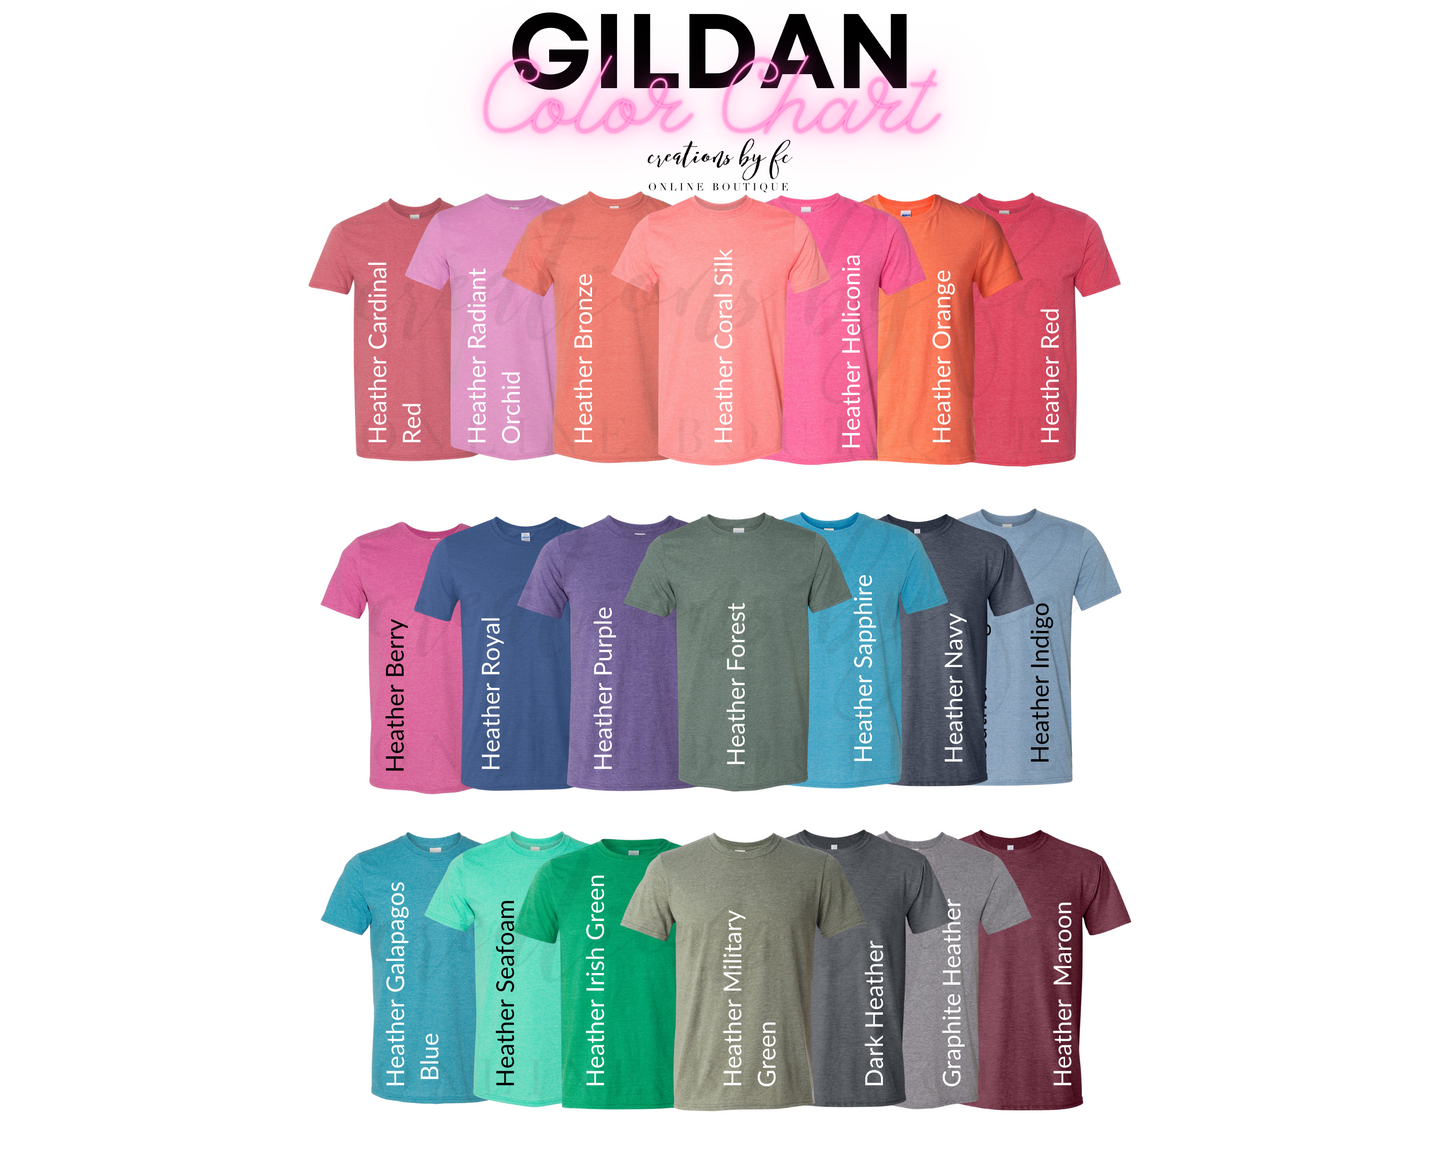 Dad of Girls Scan Here for Payment Men's Graphic Tee - Bella Lia Boutique